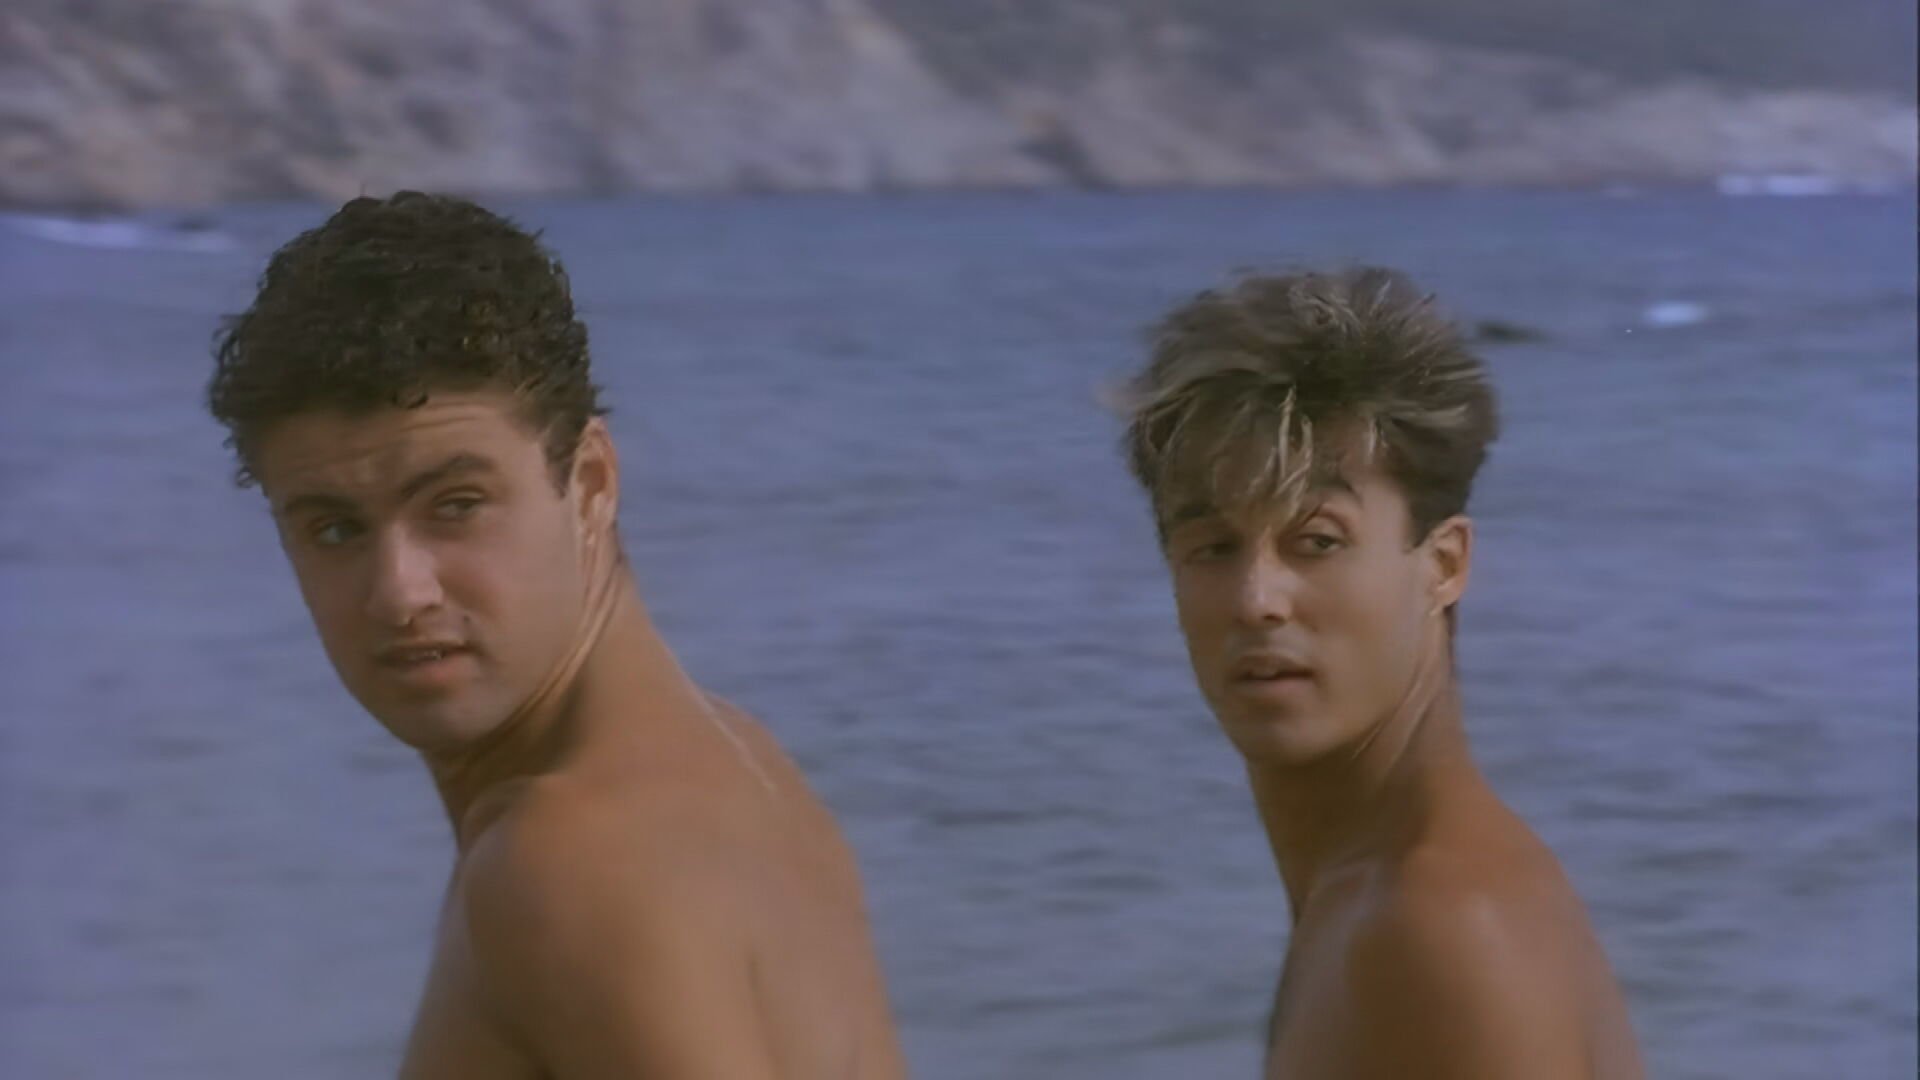 Andrew remembers 'iconic' Club Tropicana video, filmed in Ibiza in 1983